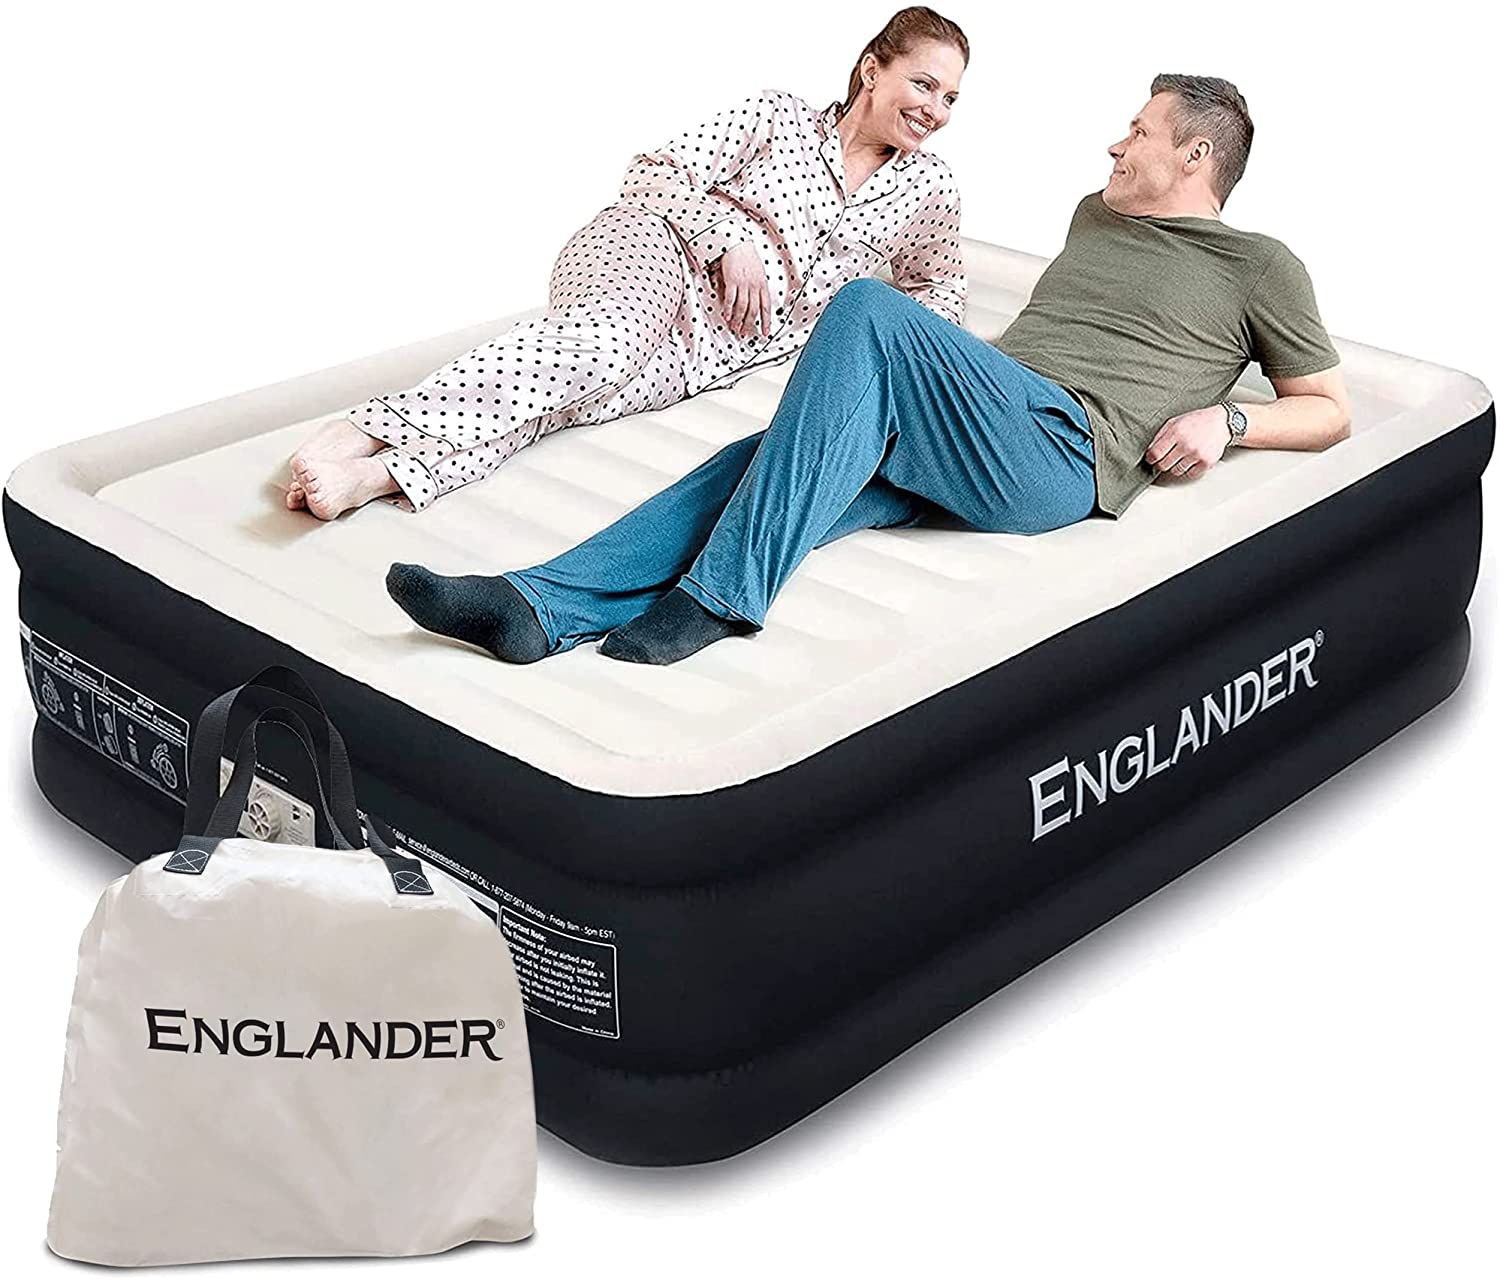 Englander Air Mattress with Built in Pump - California King, 20 inch Thickness, Black - image 2 of 10